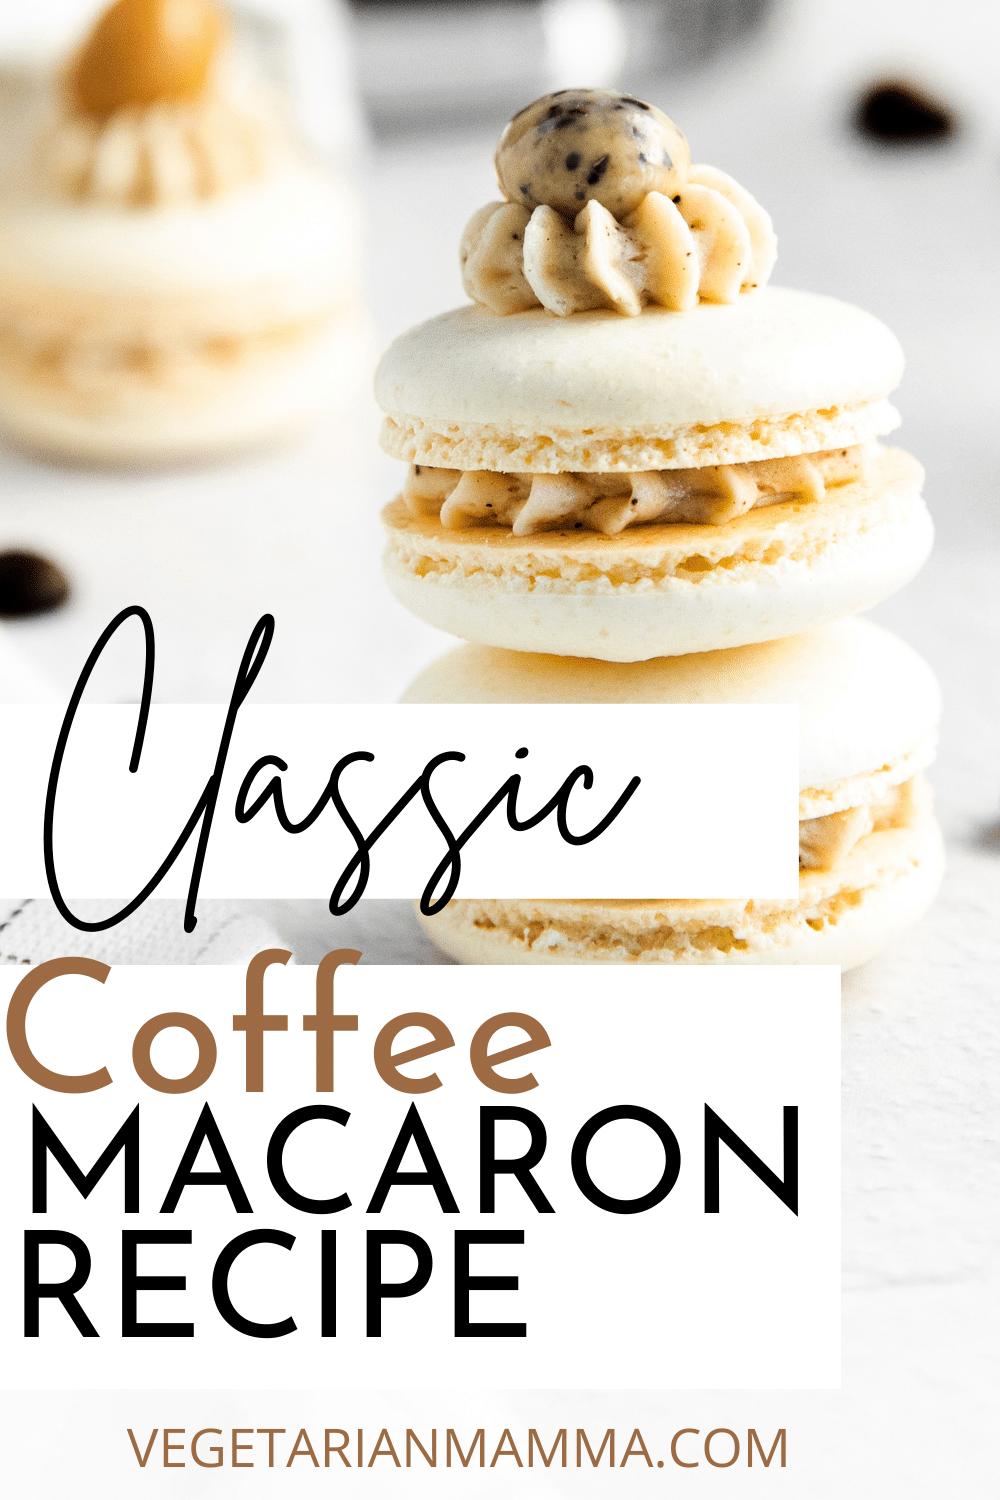 Start your morning or afternoon with these Coffee Macarons! This recipe will teach you how to make perfect airy macaron shells filled with an espresso-spiked buttercream frosting.